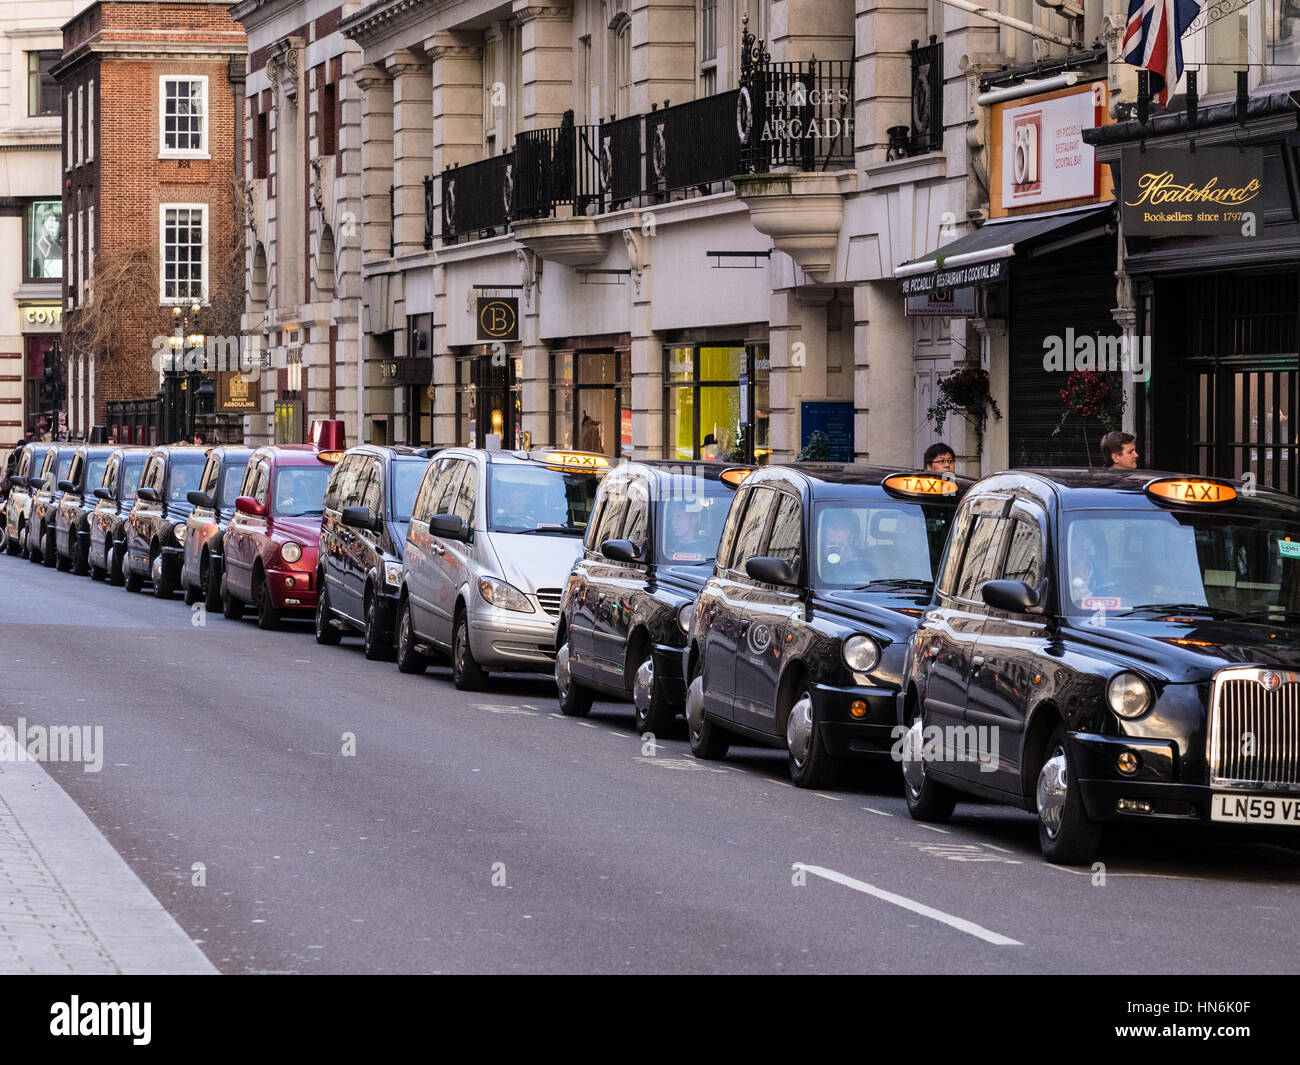 Taxi Rank London Taxis Black Cabs queue for passengers in Piccadilly, Central London Stock Photo